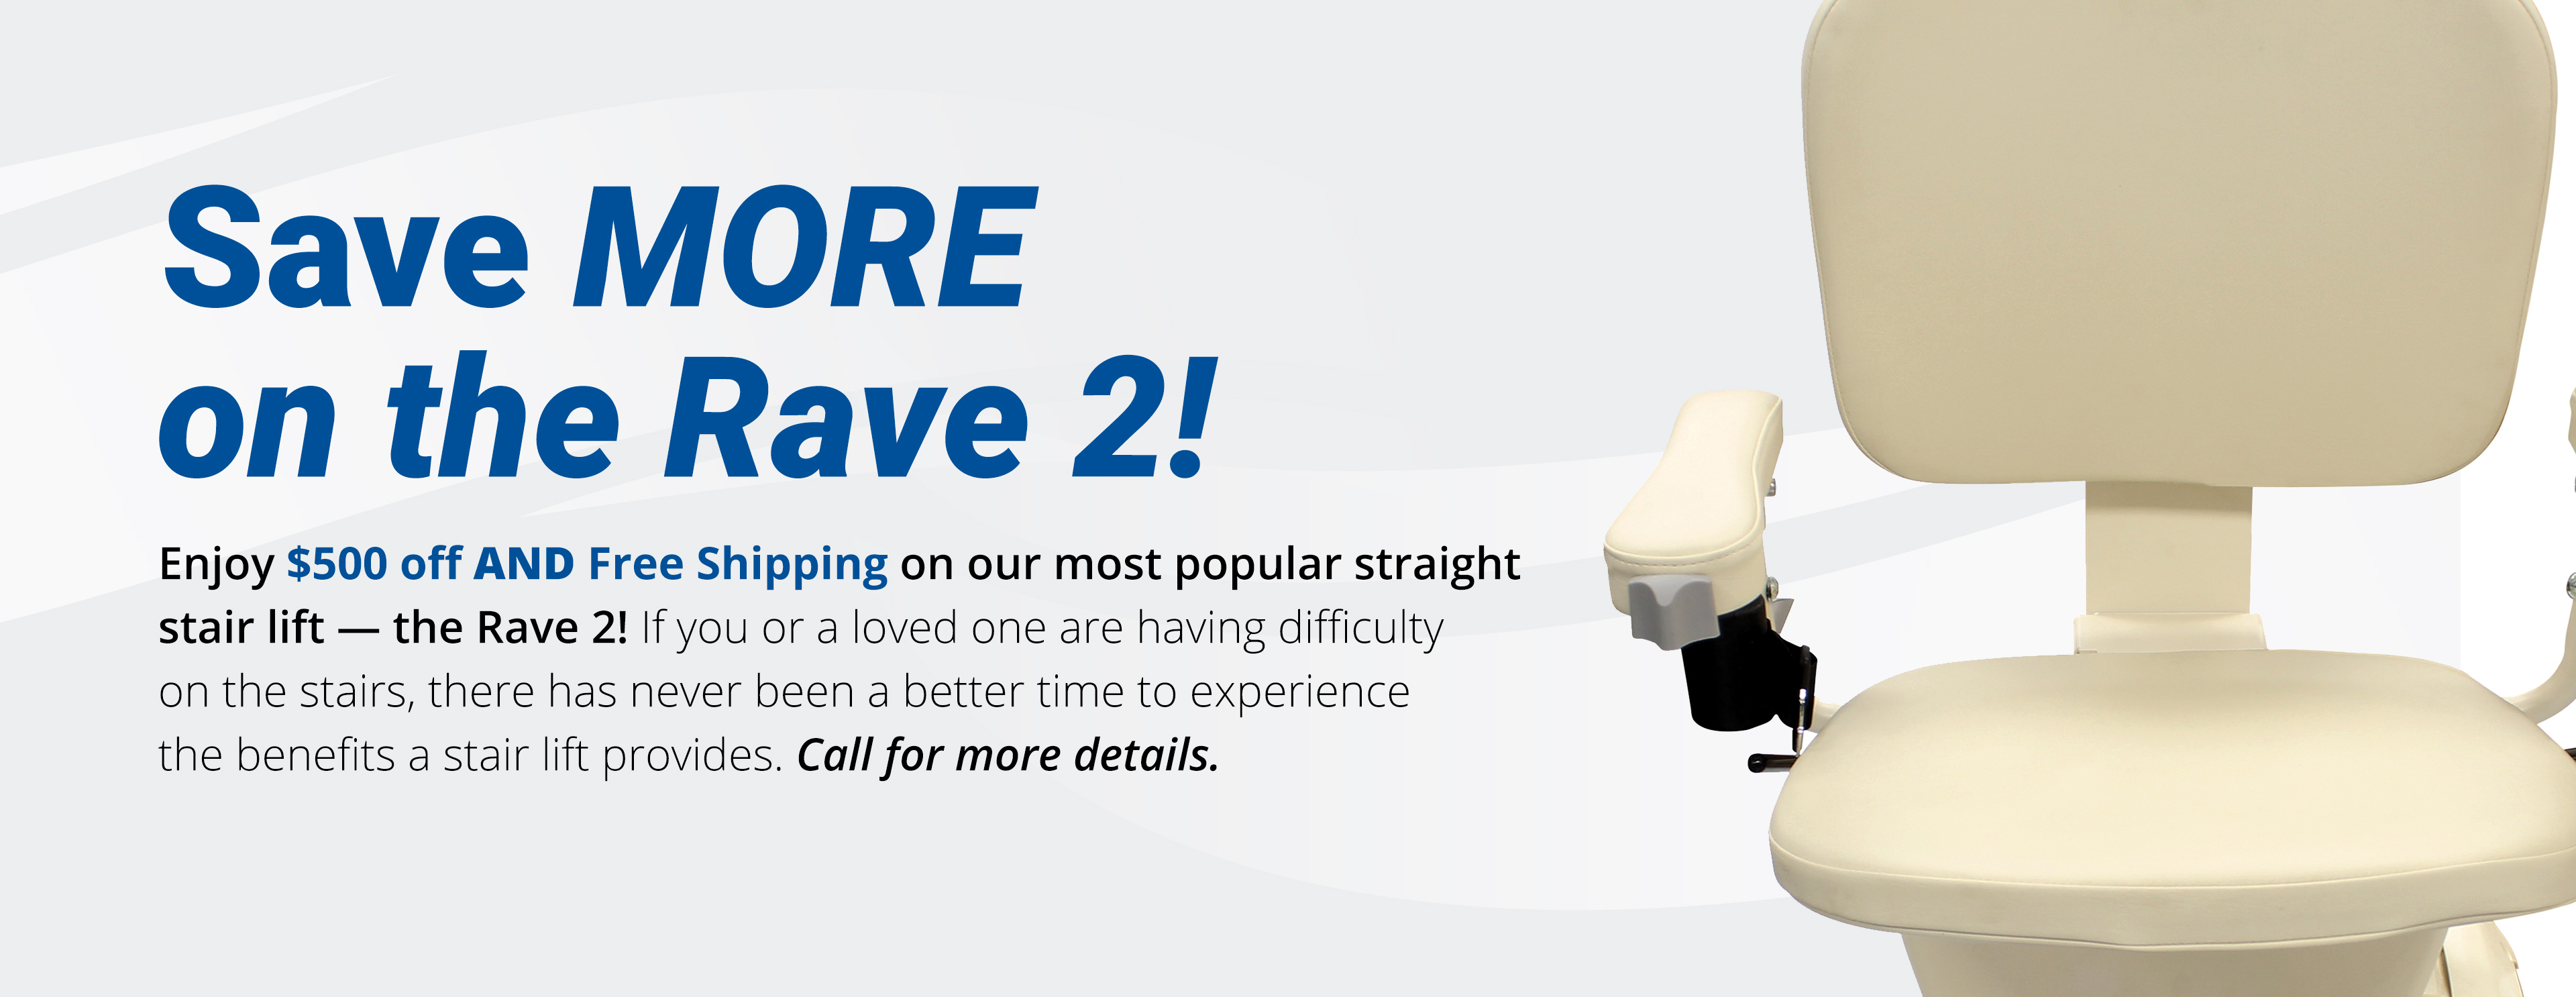 Save more on the Rave 2! $500 off and free shipping. Call for details.